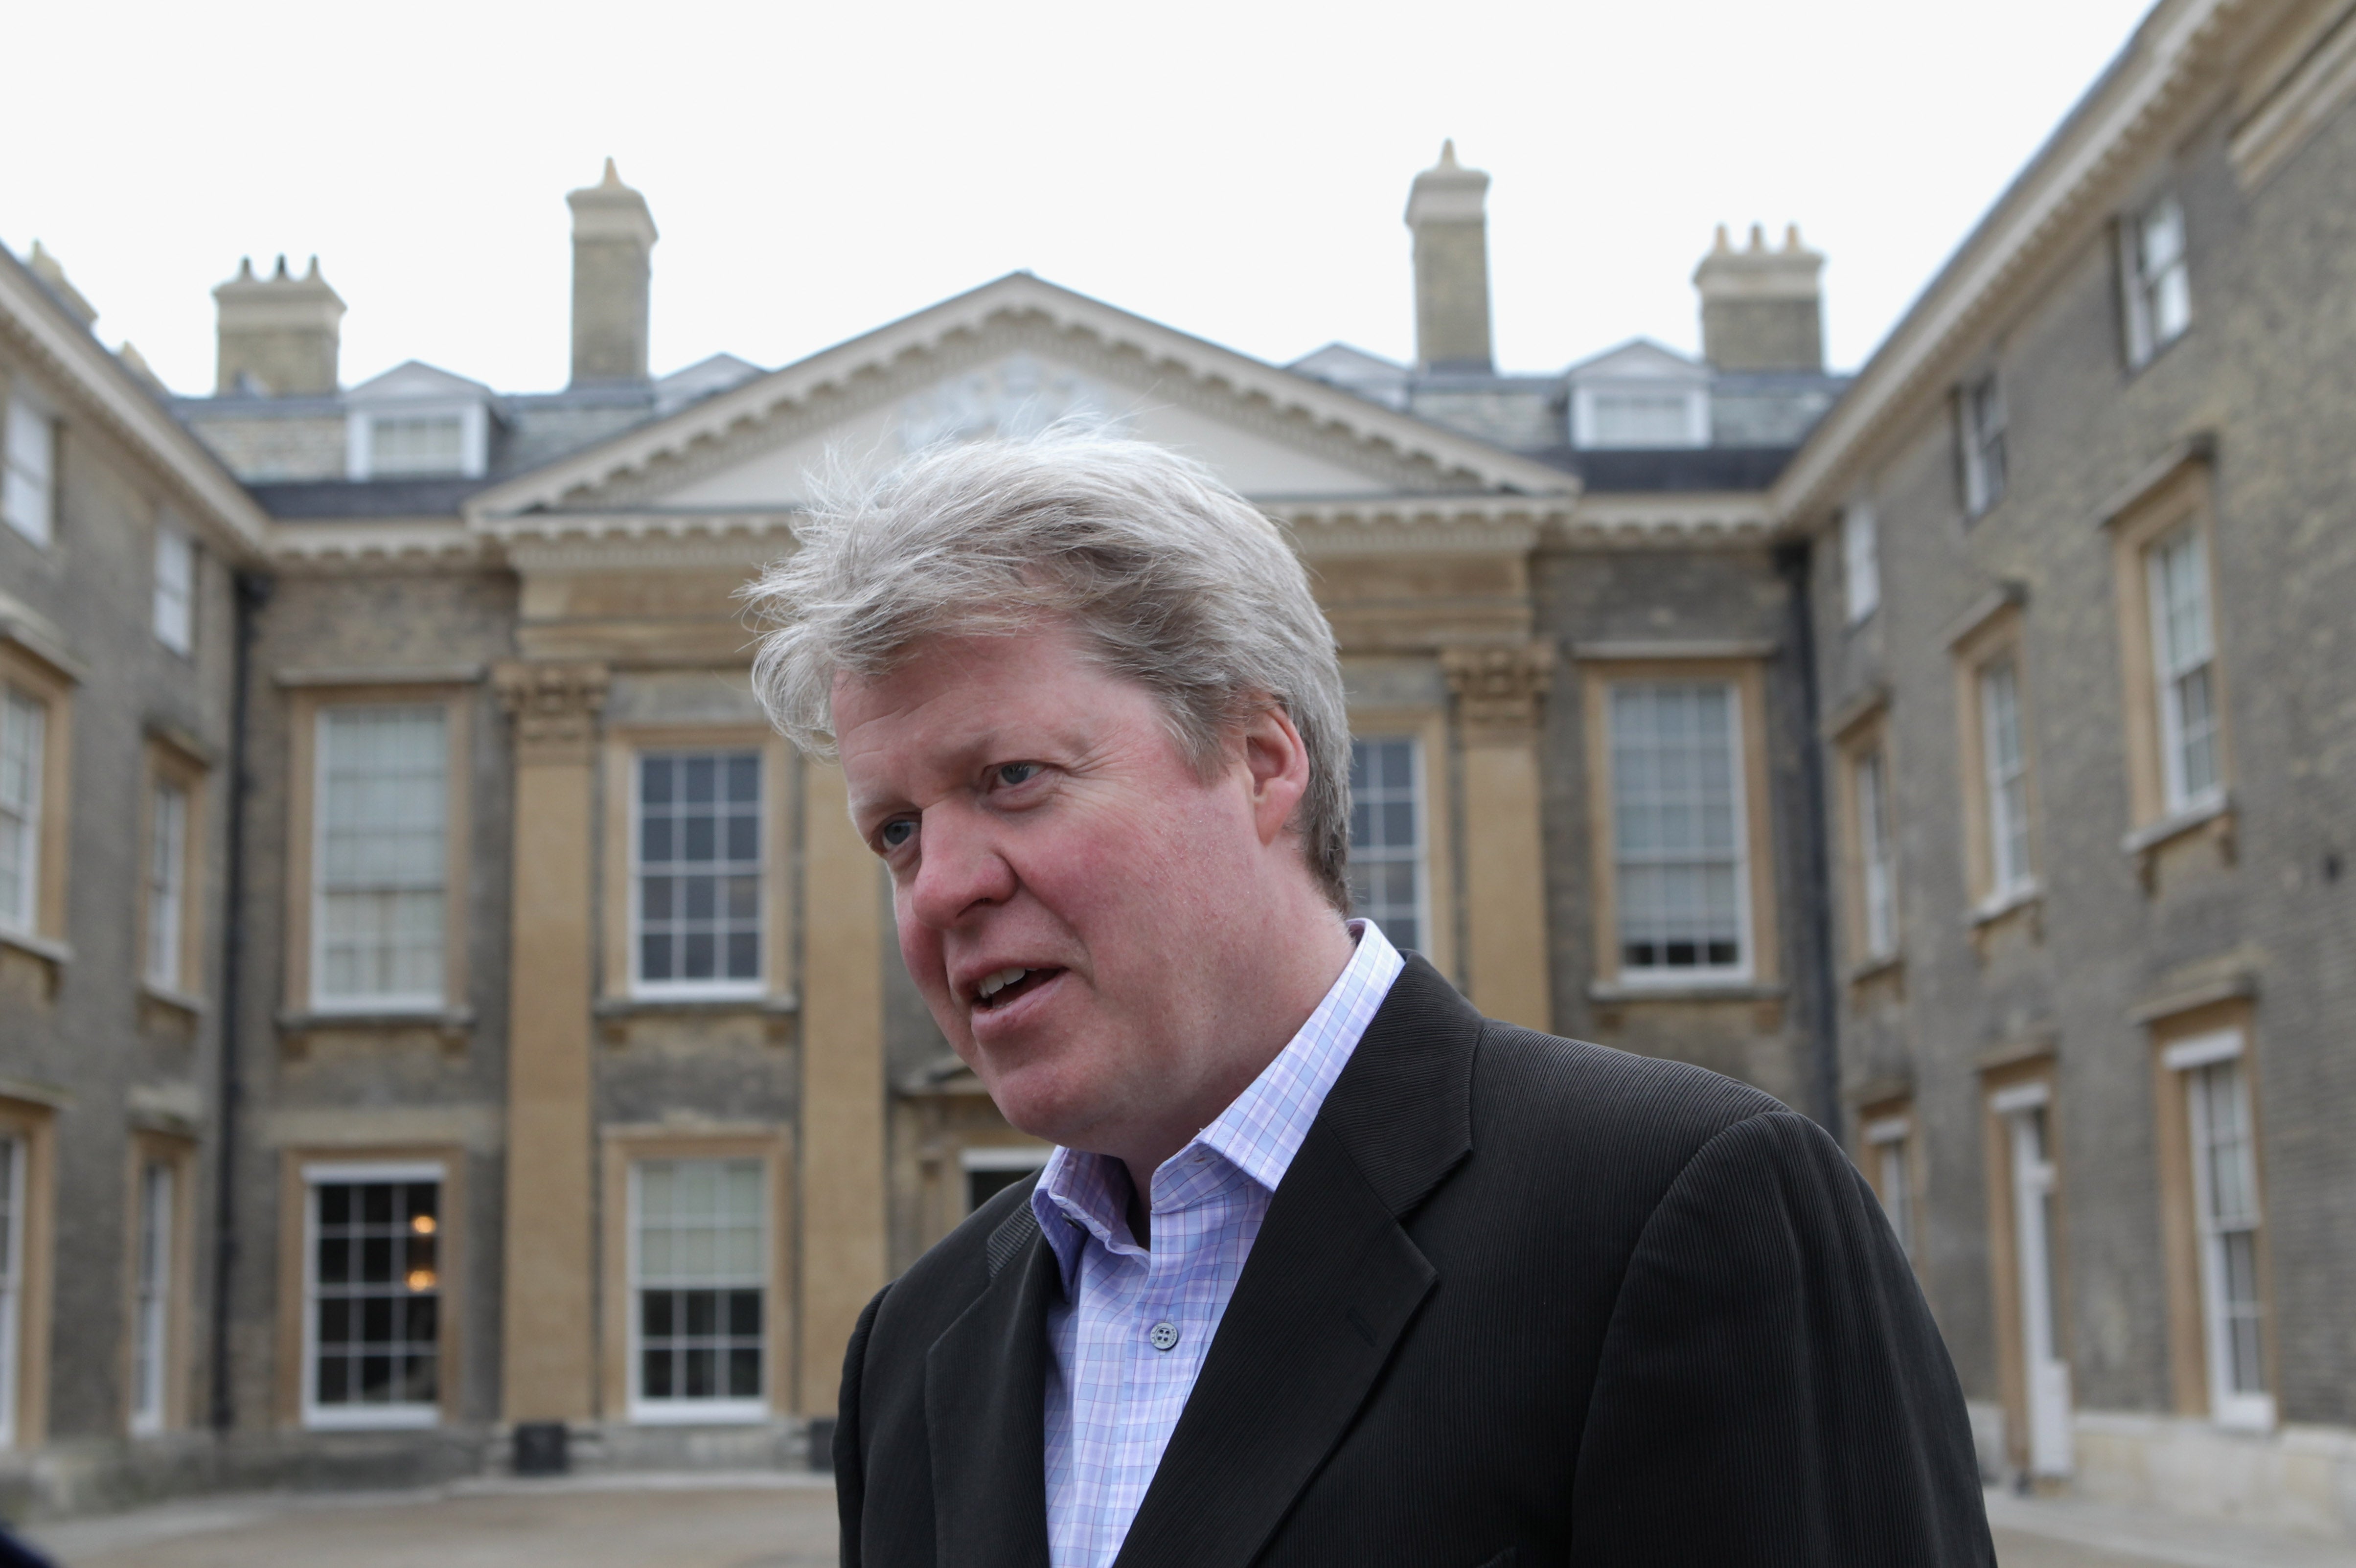 Charles Spencer has said a schoolmaster who allegedly abused and was violent towards him lives near his estate Althorp House in Northamptonshire